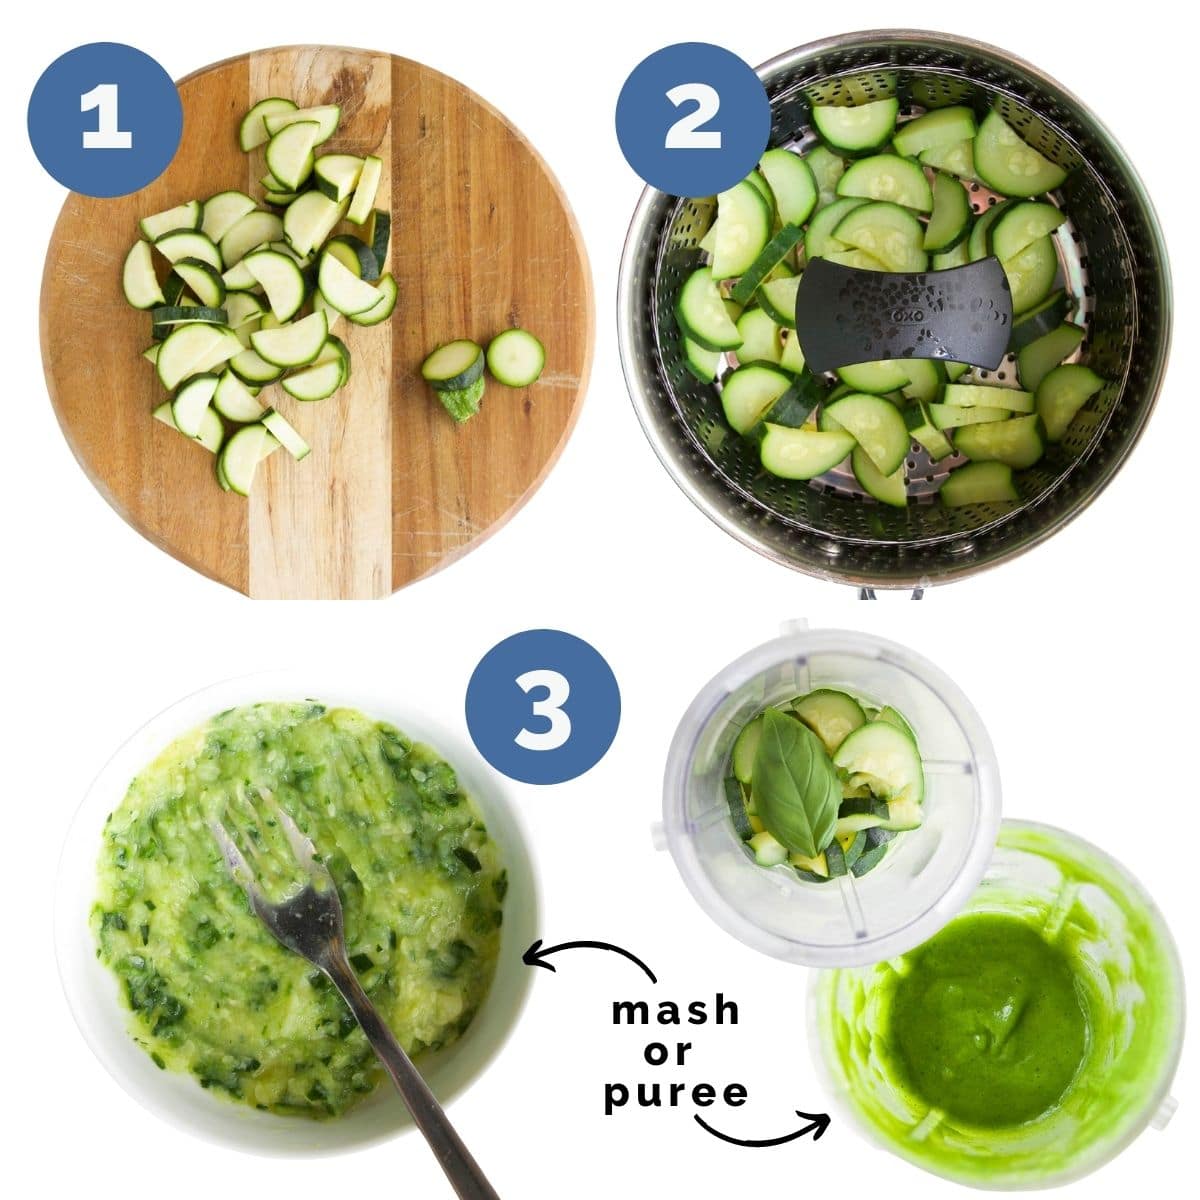 Collage of 4 Images Showing How to Make Zucchini Puree 1) Chop zucchini 2)Steam Zucchini 3)Mash Zucchini 4)Puree Zucchini